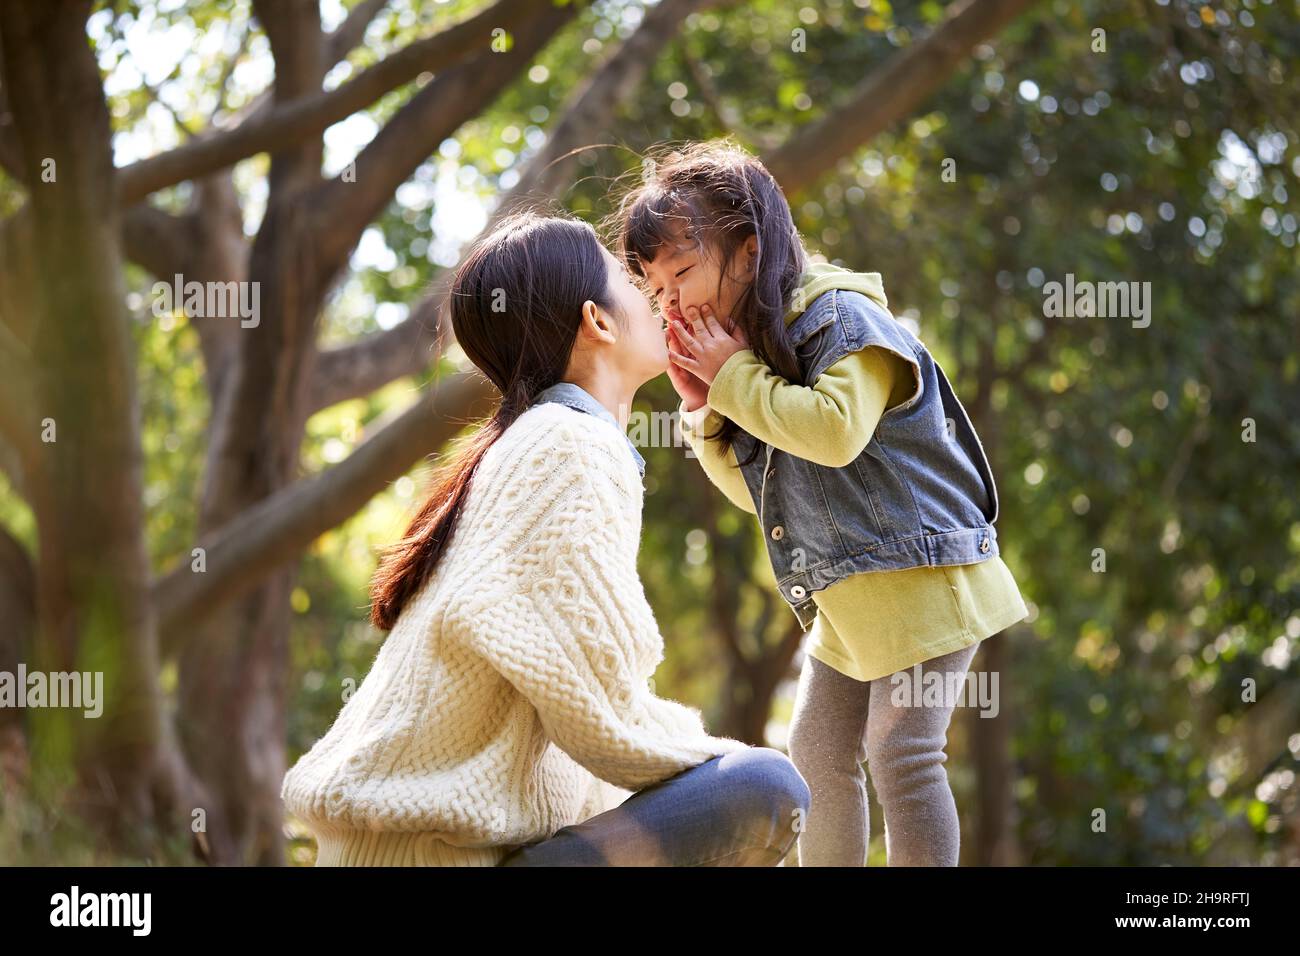 asian mother and daughter having a good time outdoors in city park Stock Photo